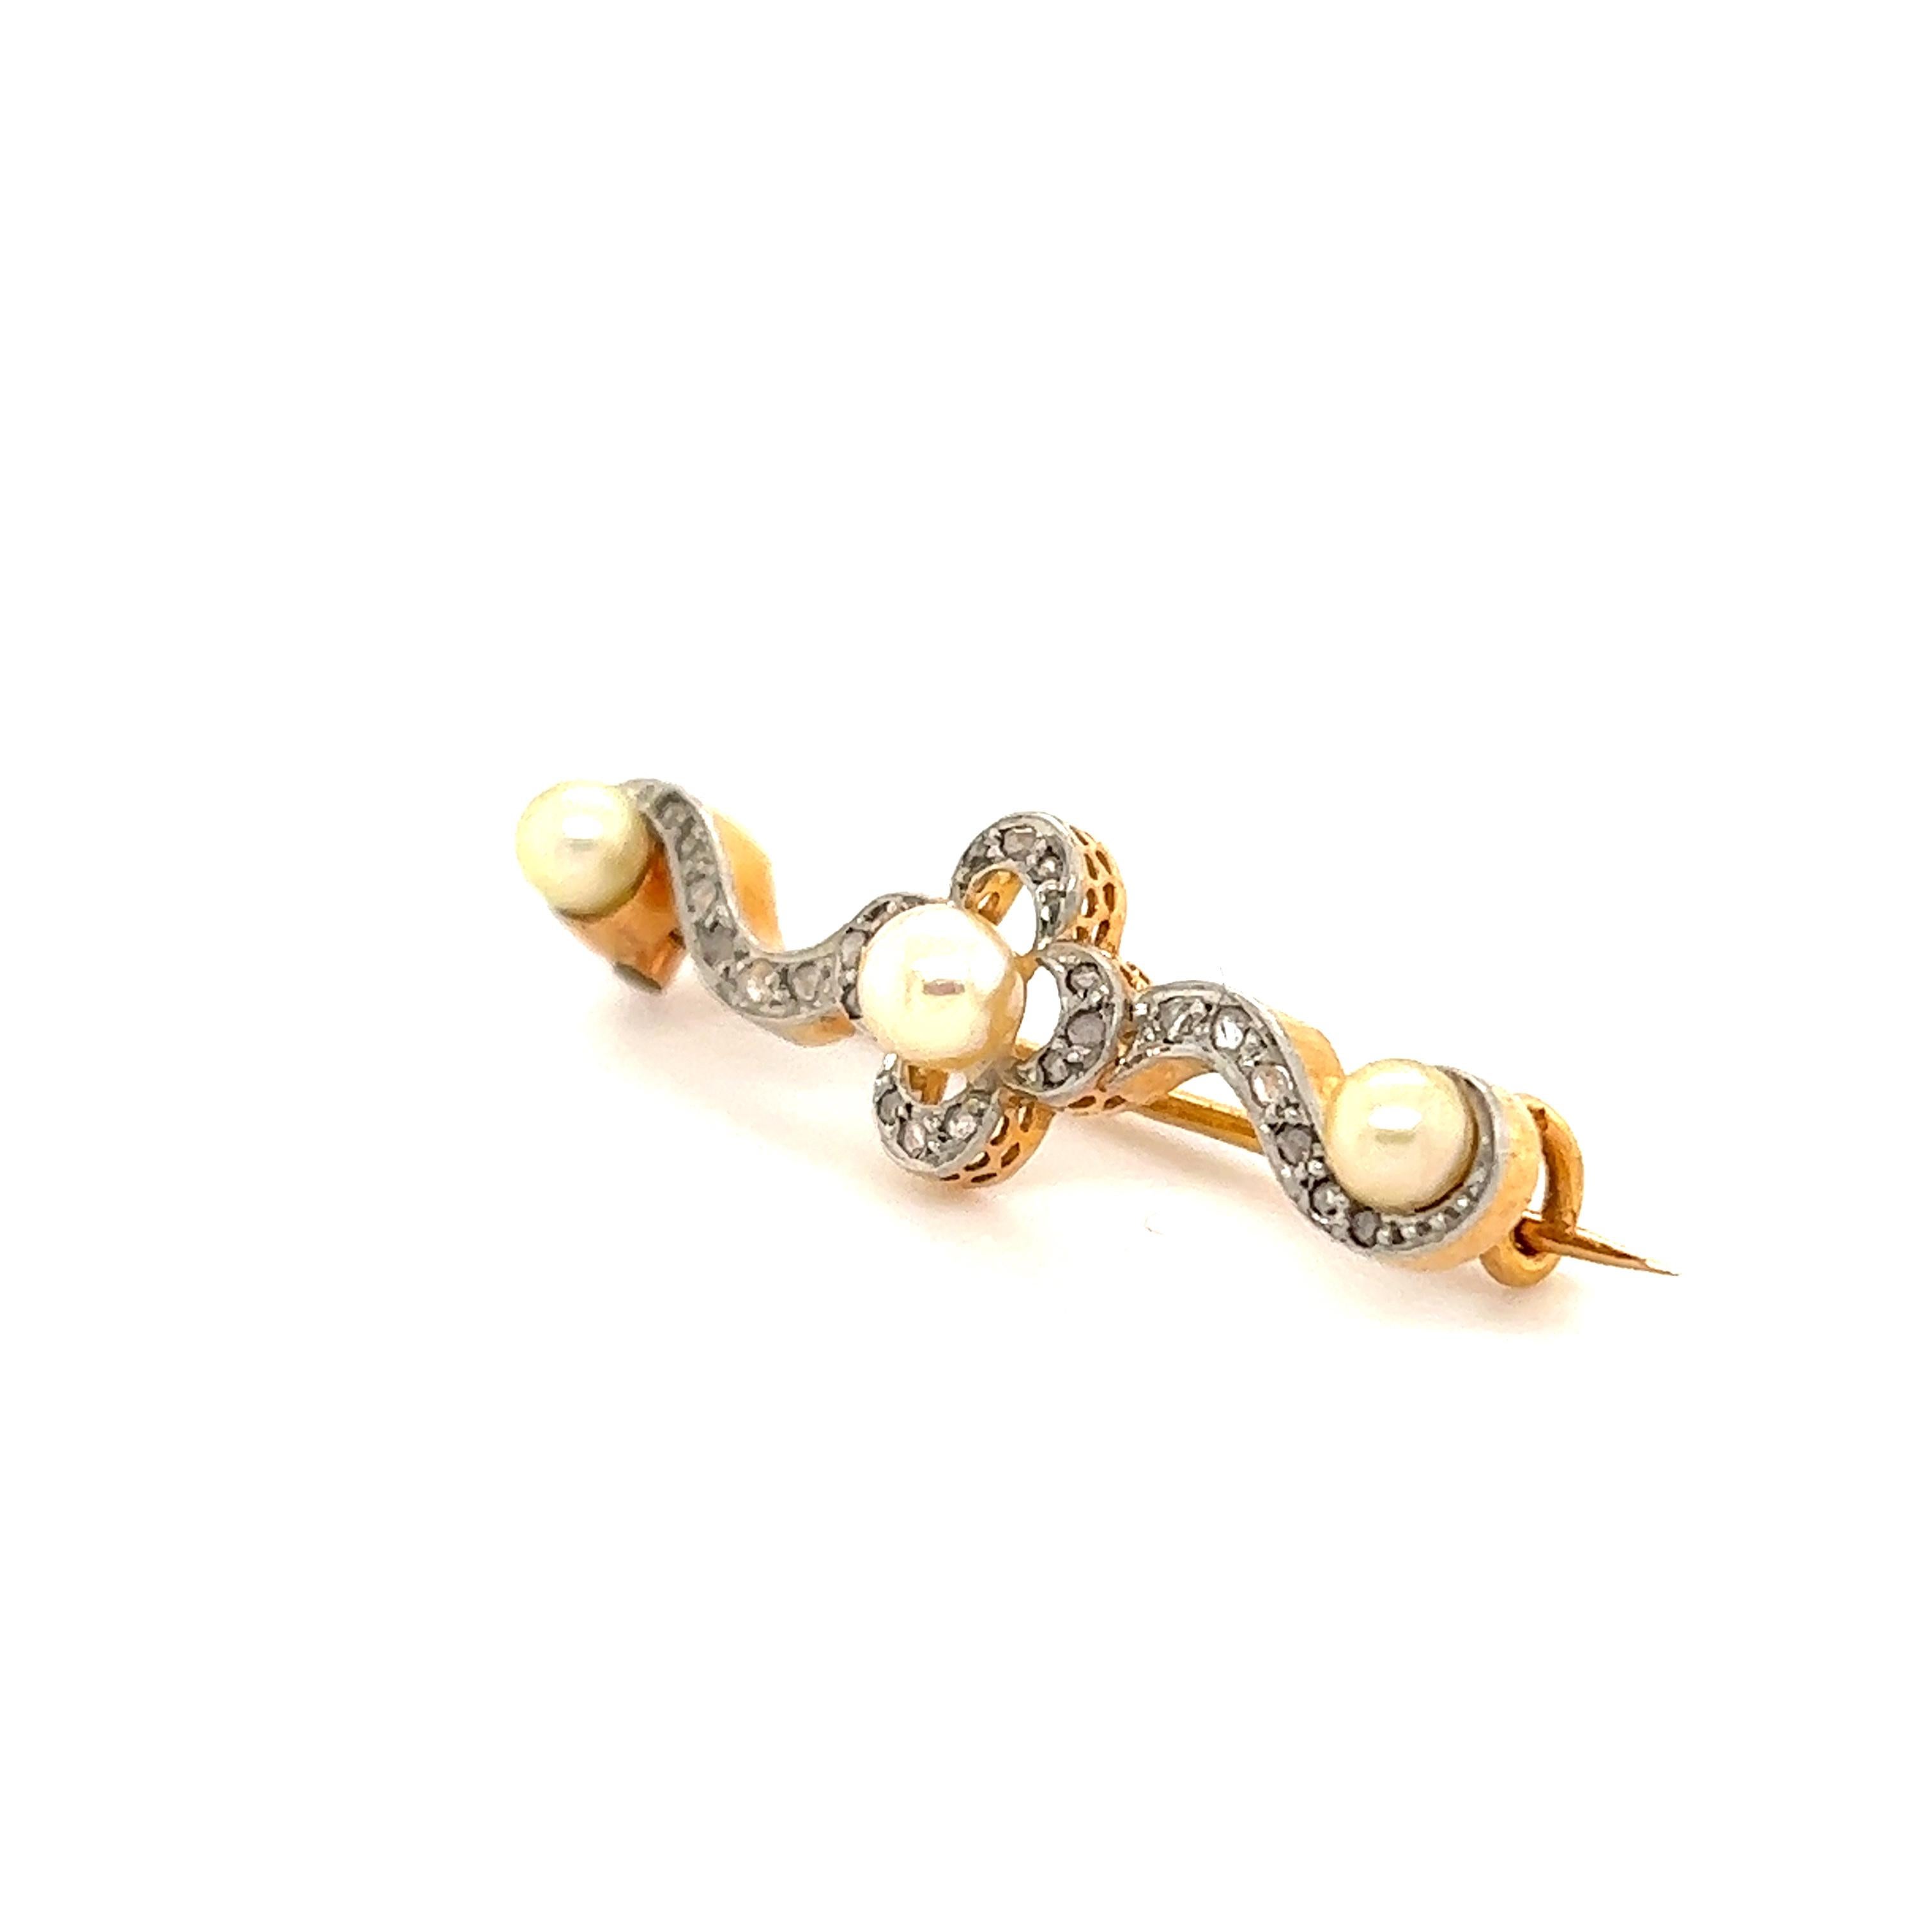 Delicately created over 120 years ago this pin is sure to stand out. This beautiful creation measures apprioximately 1.25